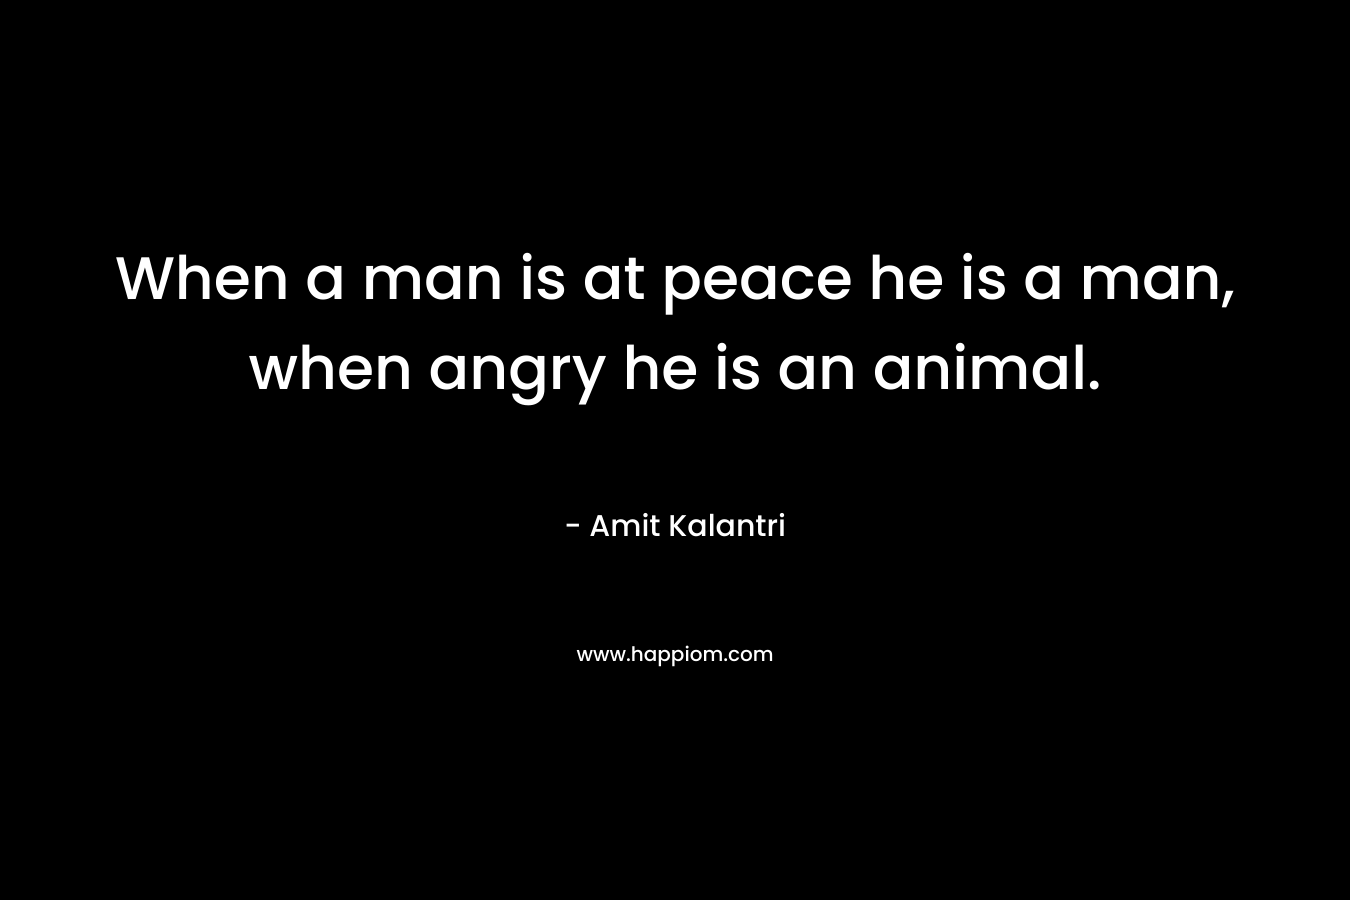 When a man is at peace he is a man, when angry he is an animal.